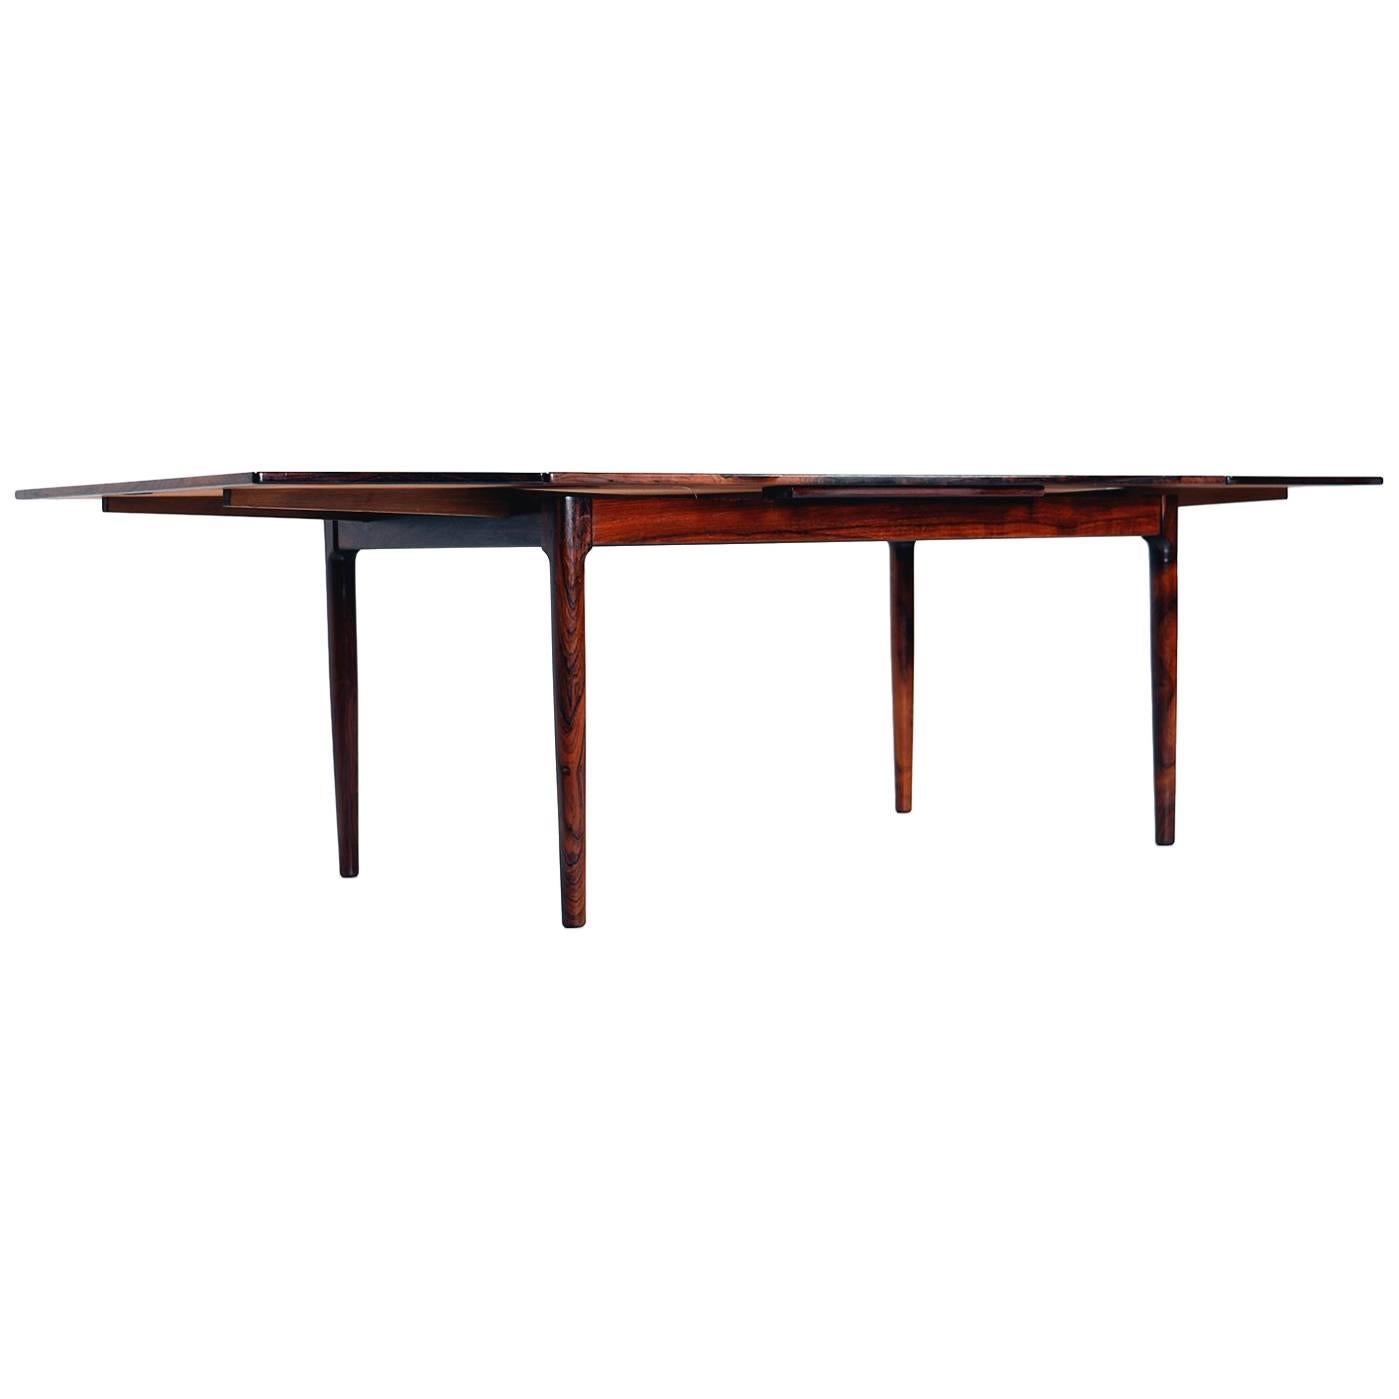 Gorgeous Scandinavian modern rosewood extendable draw leaf dining table, made by Bernhard Pedersen & Sons of Denmark, 1970s. Beautifully aged rosewood with a rich patina and gorgeous grain, quality craftsmanship and exquisite design. Fully